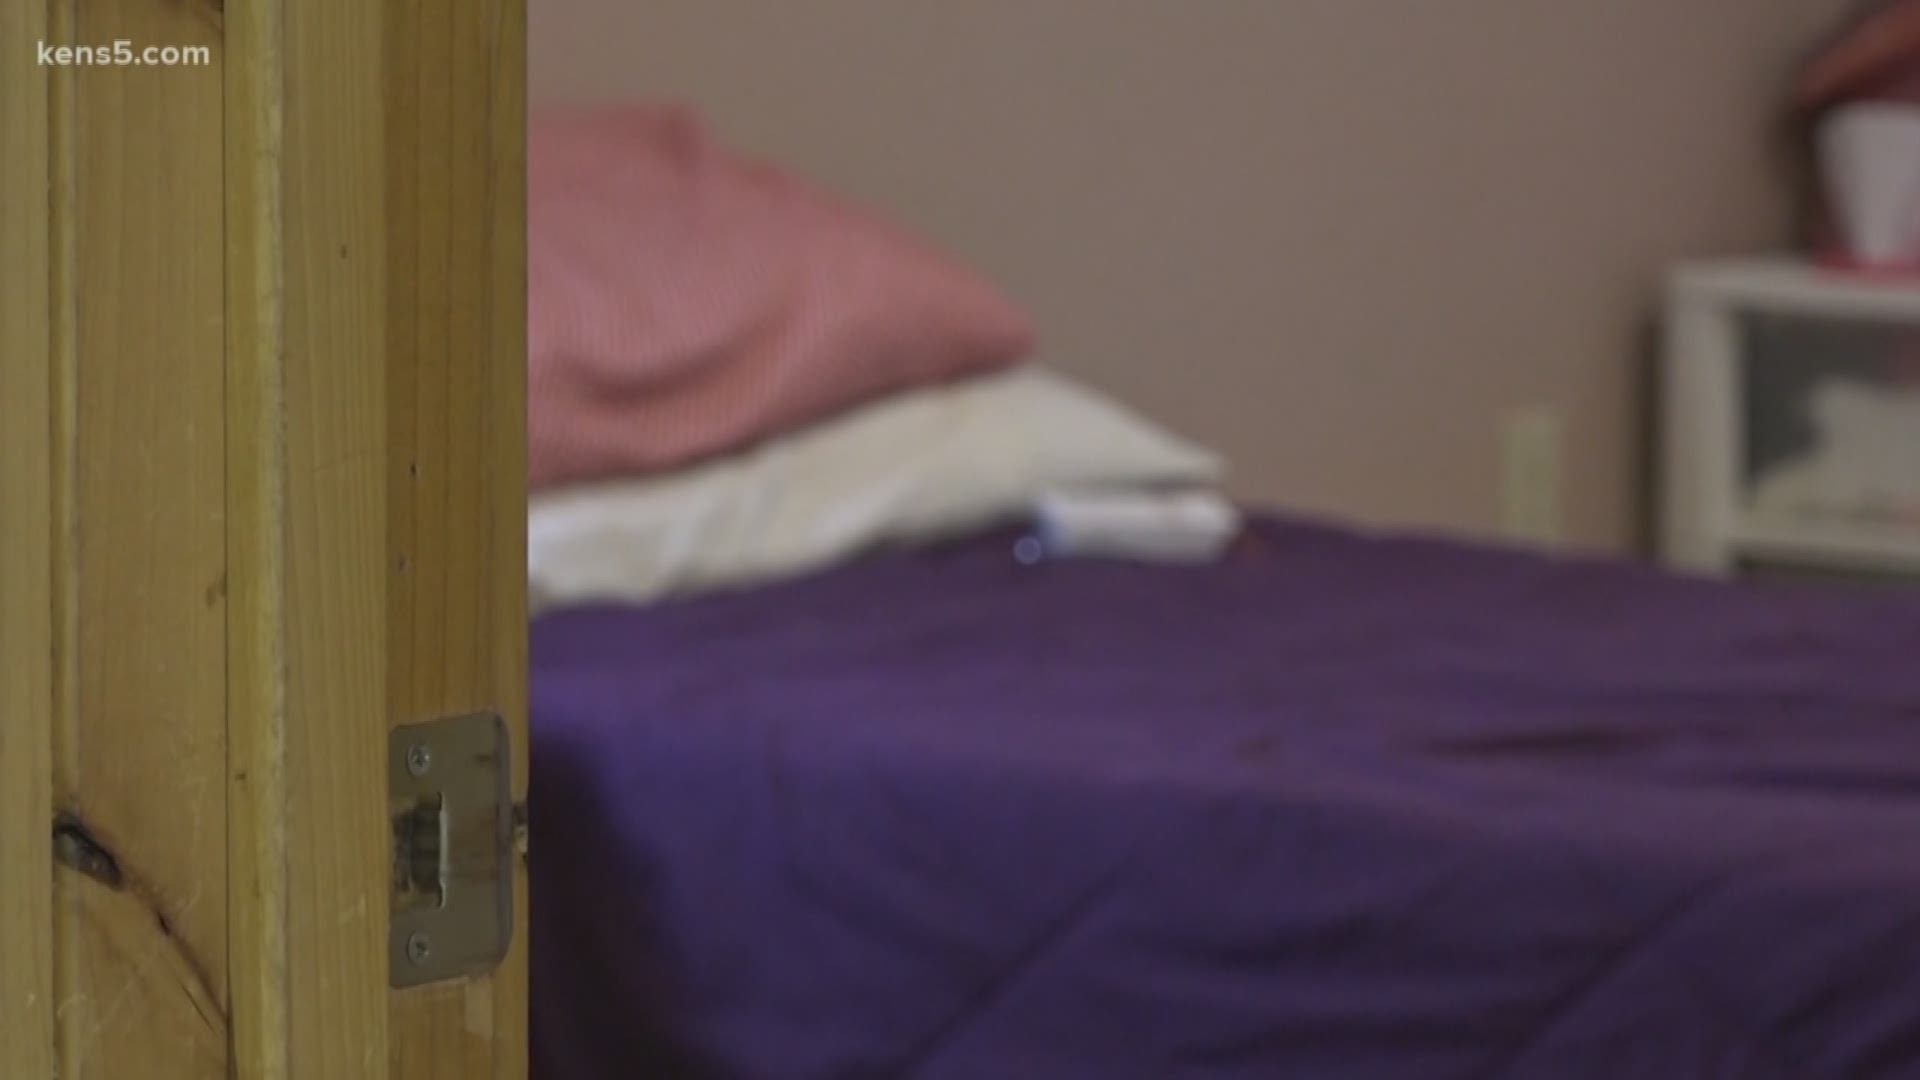 The Kendall County Women's Shelter has been full for going on six months, forcing it to counsel victims over the phone and connect others to nearby cities.